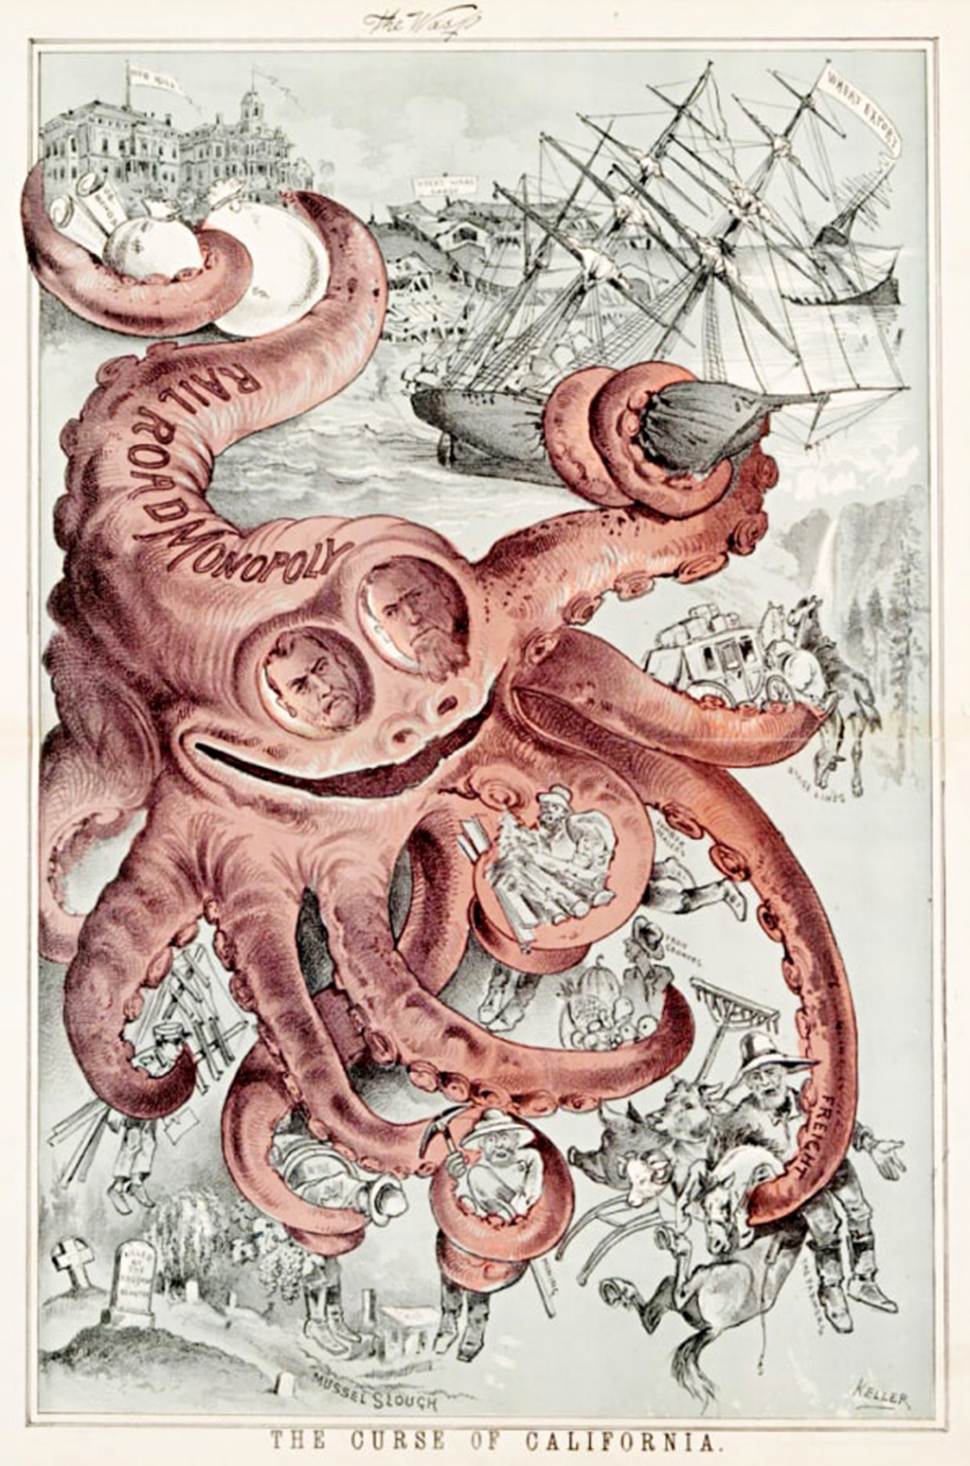 "The Octopus" by G. Frederick Keller in The Wasp, 1882, courtesy Bancroft Library, which portrayed controlling all aspects of the California Economy. Courtesy Fillmore Historical Museum.